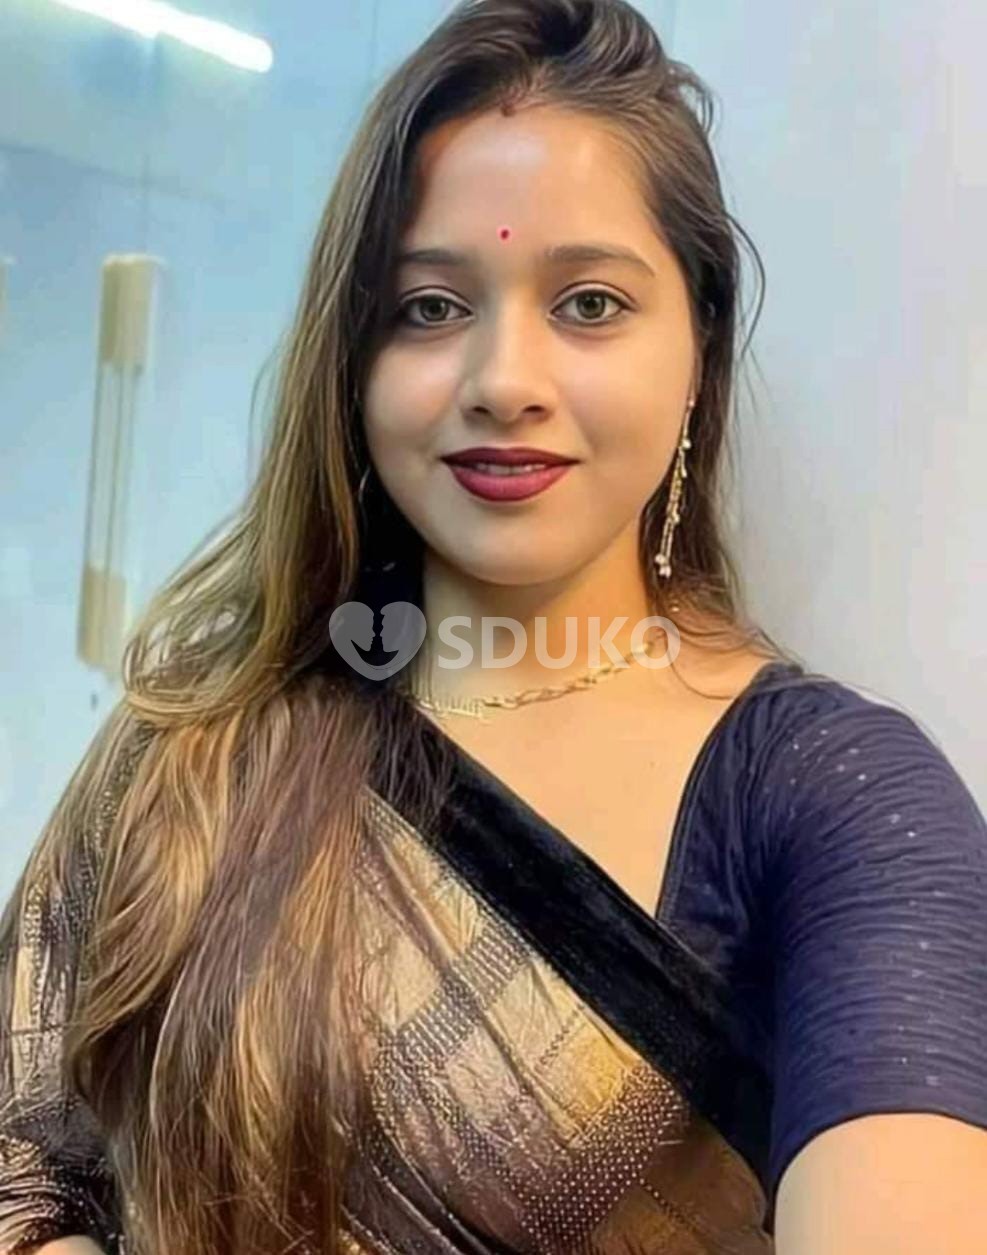 ( 24×7 PONDICHERRY ALL AREA)❣️BEST VIP HOT COLLEGE GIRL GENUINE SERVICE PROVIDE UNLIMITED SHOTS ALL TYPE SEX ALLOW